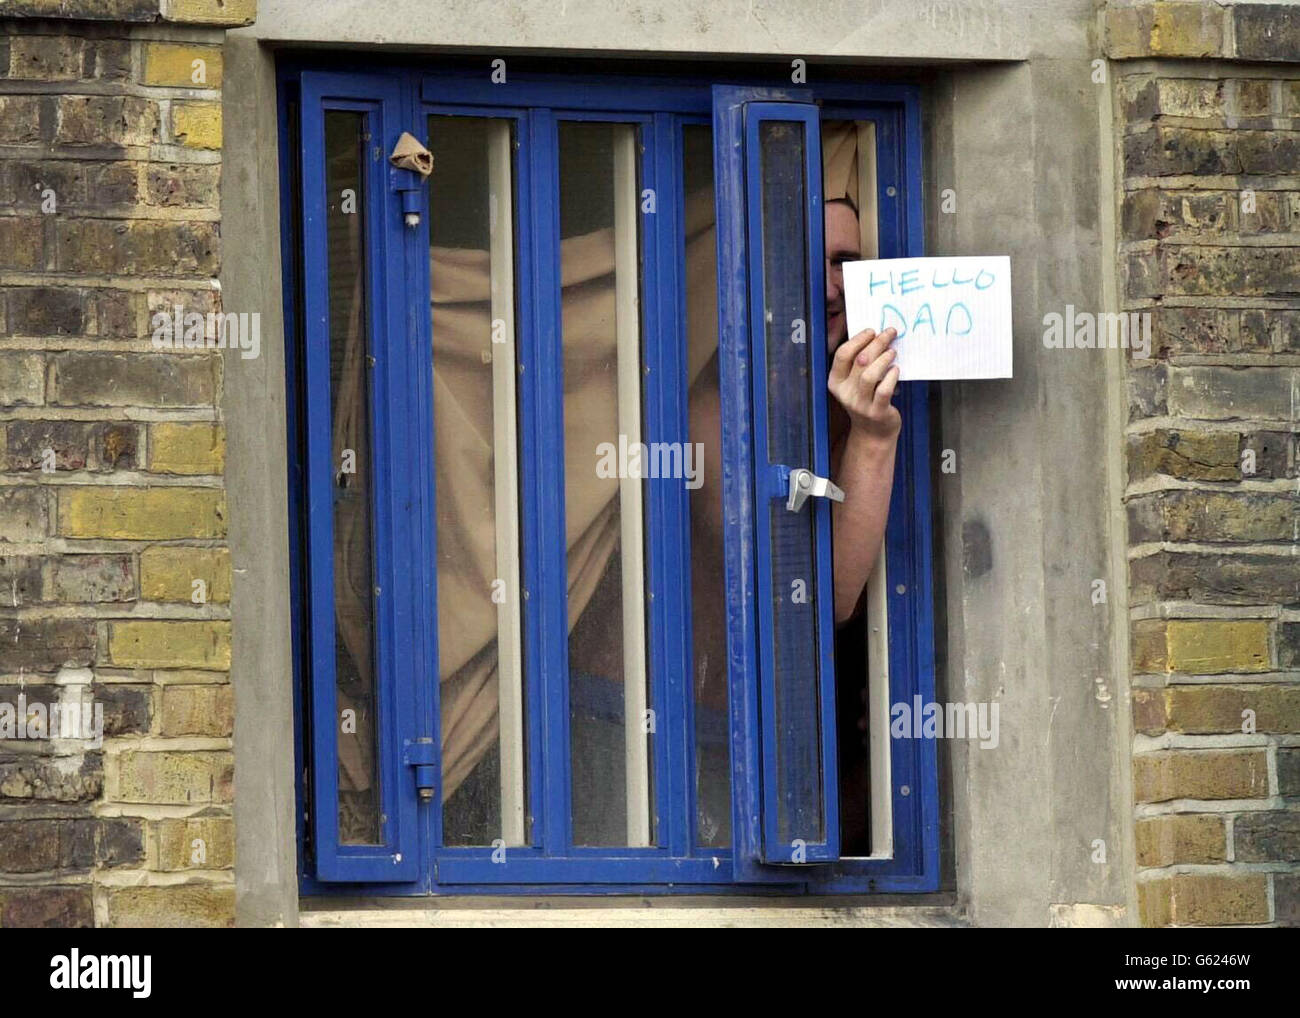 A prisoner pushes a message through a cell window at Wormwood Scrubs prison in west London, which is still riddled with serious problems four years after a culture of staff brutality was exposed, the Chief Inspector of Prisons said in a new report. * Although the 1,000-inmate jail is now rid of rogue officers who violently assaulted inmates, the institution is still 'stigmatised and struggling to move on' Anne Owers said. Stock Photo